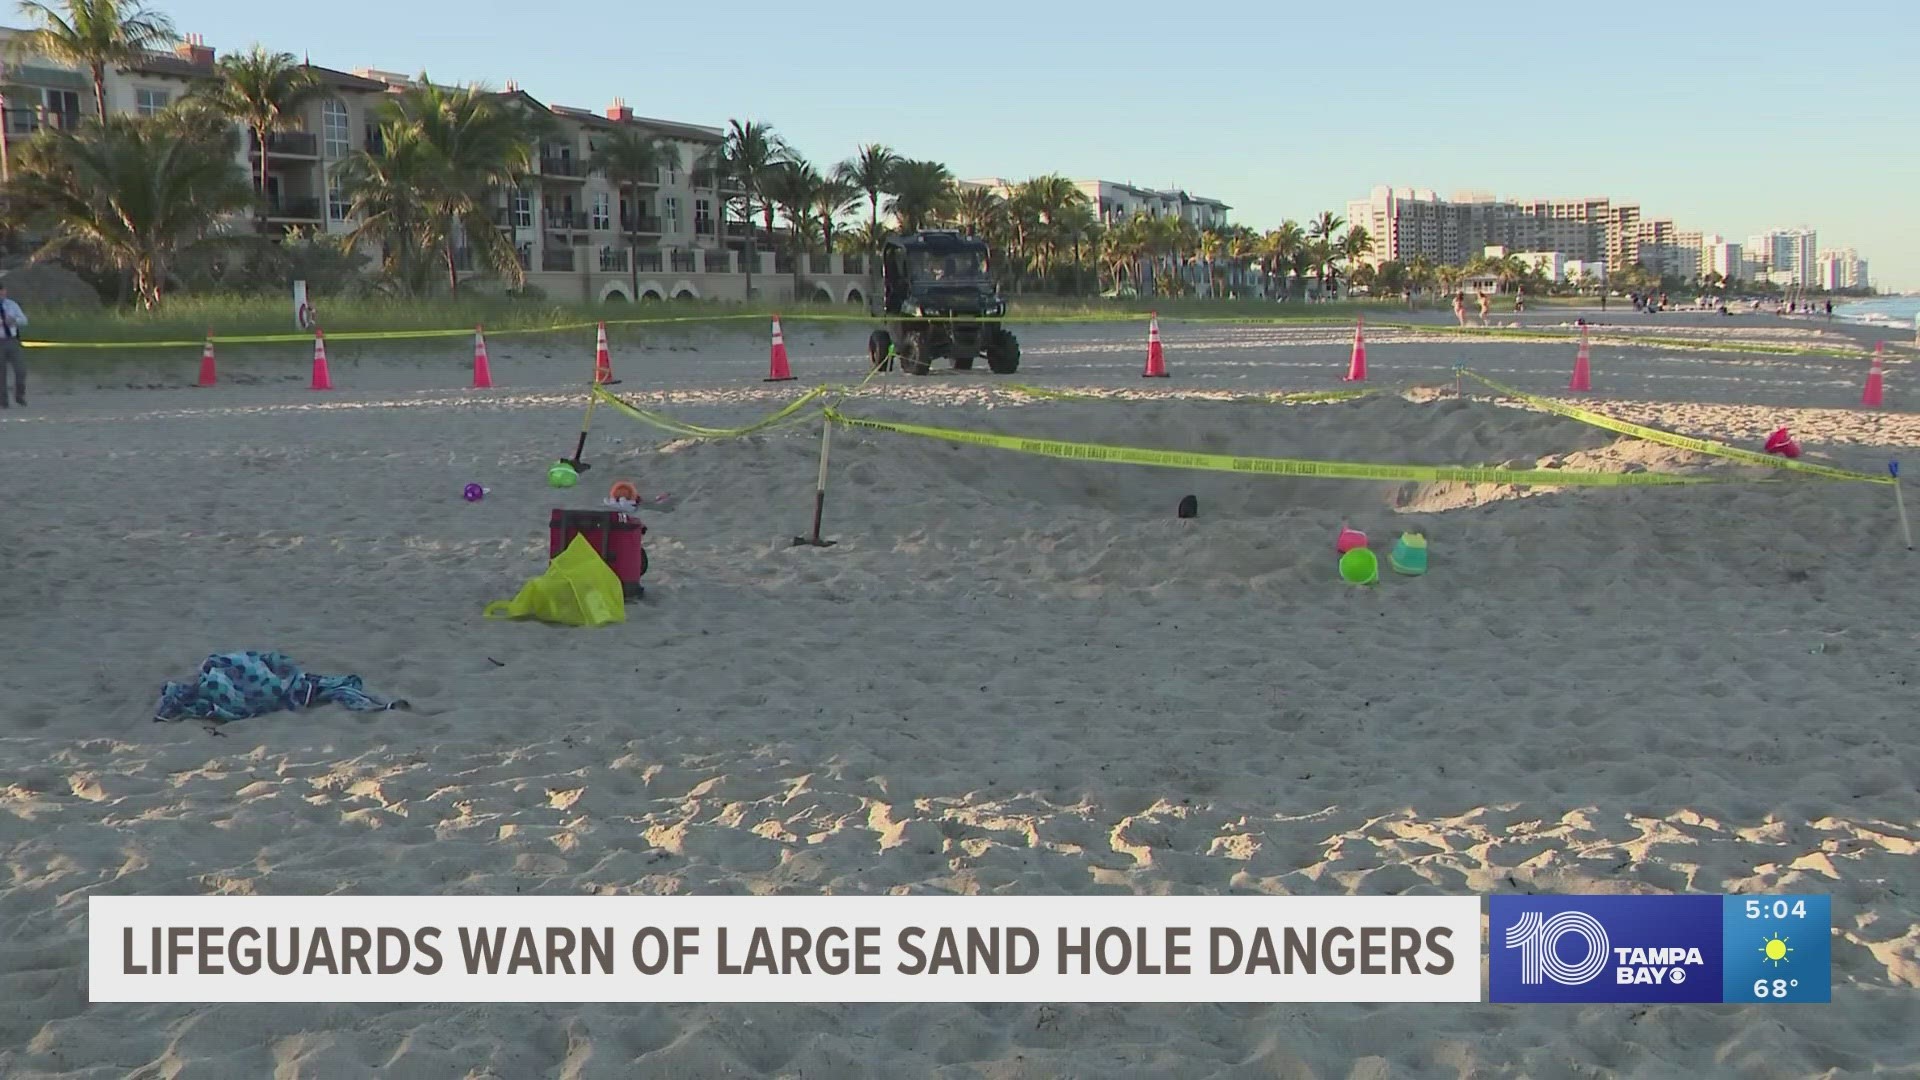 News reports and a 2007 medical study show that about three to five children die in the United States each year when a sand hole they are digging collapses on them.